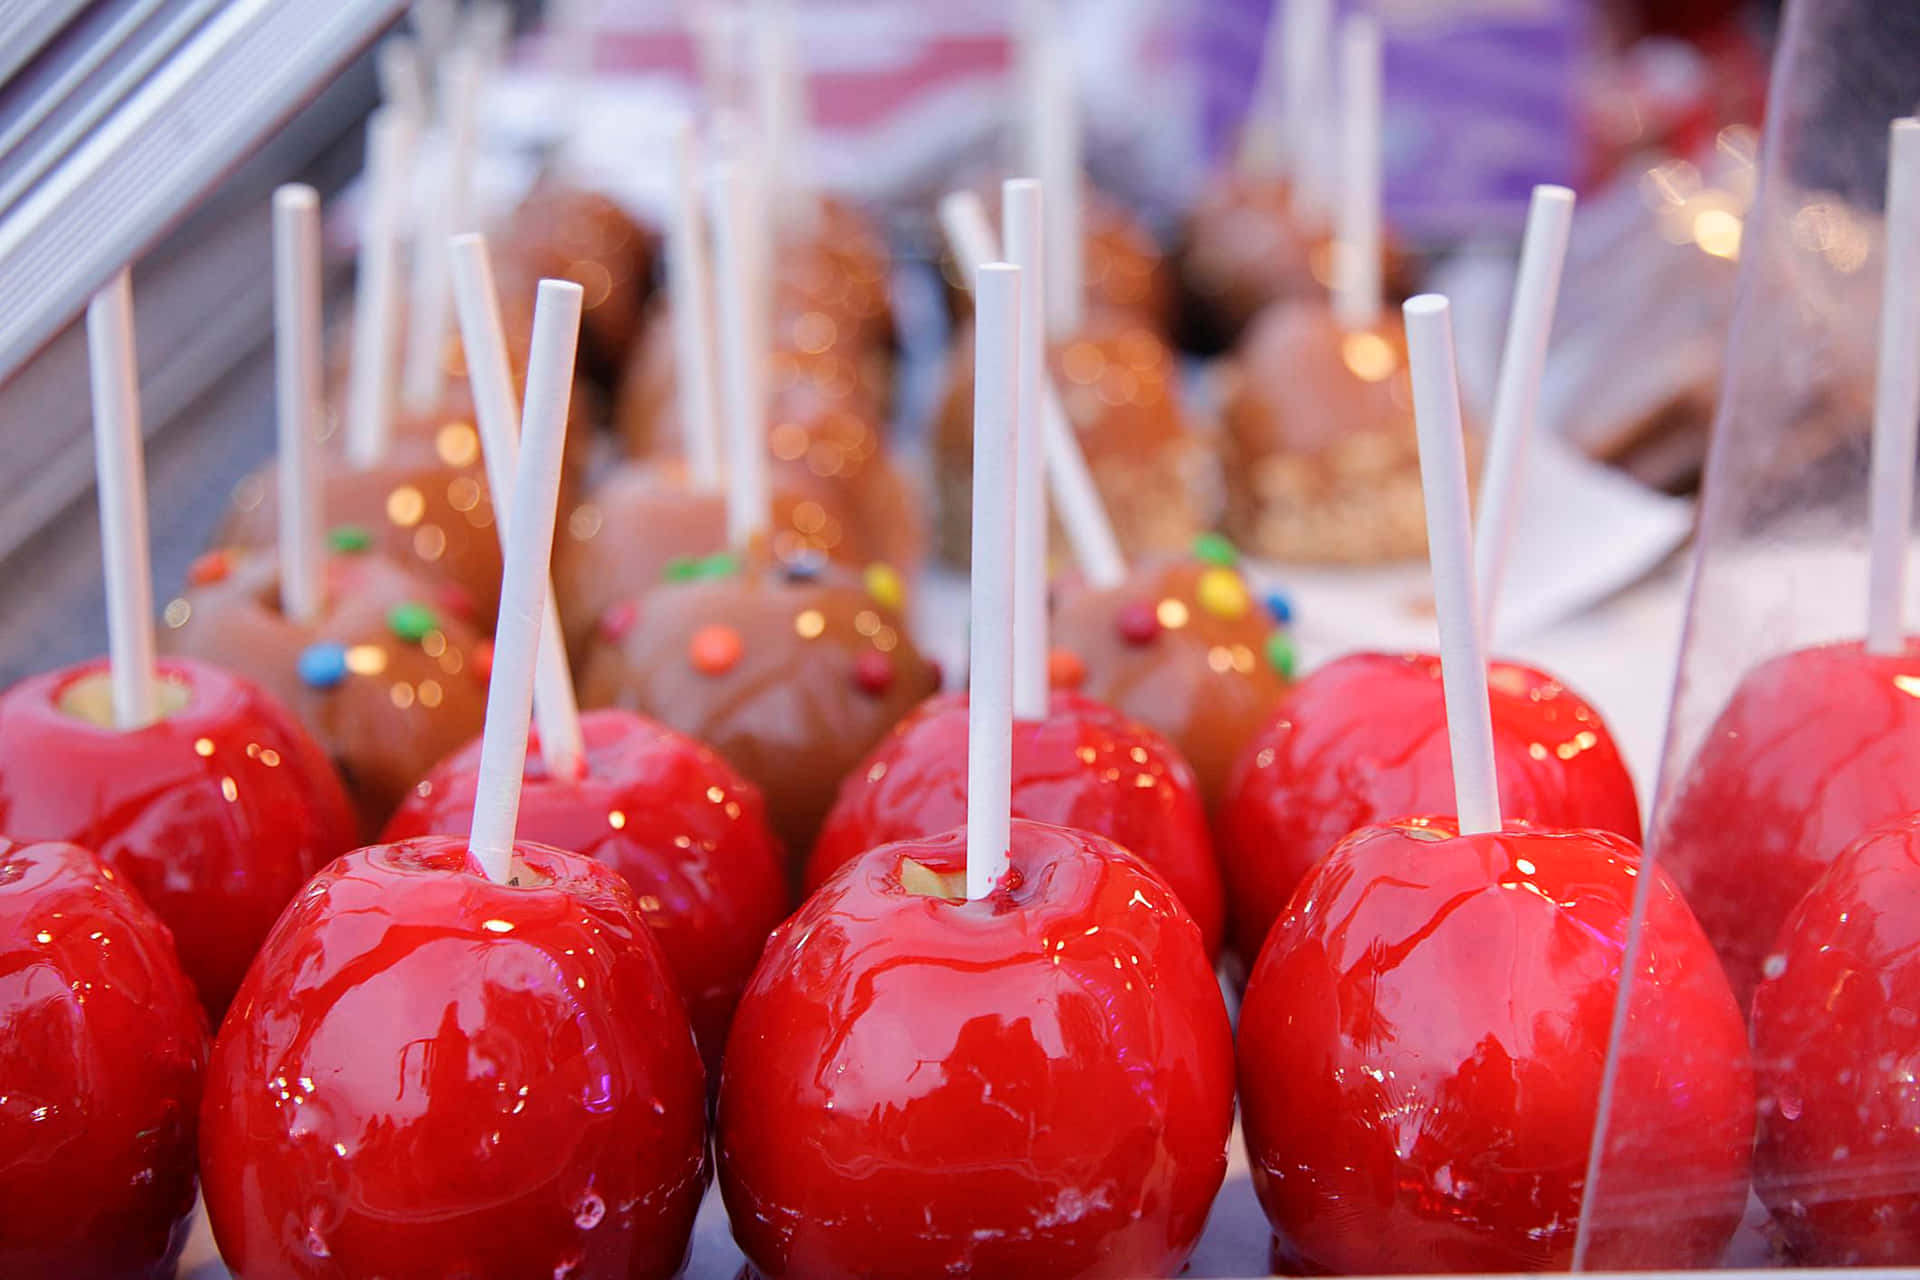 Delectable Candy Apples on Display Wallpaper